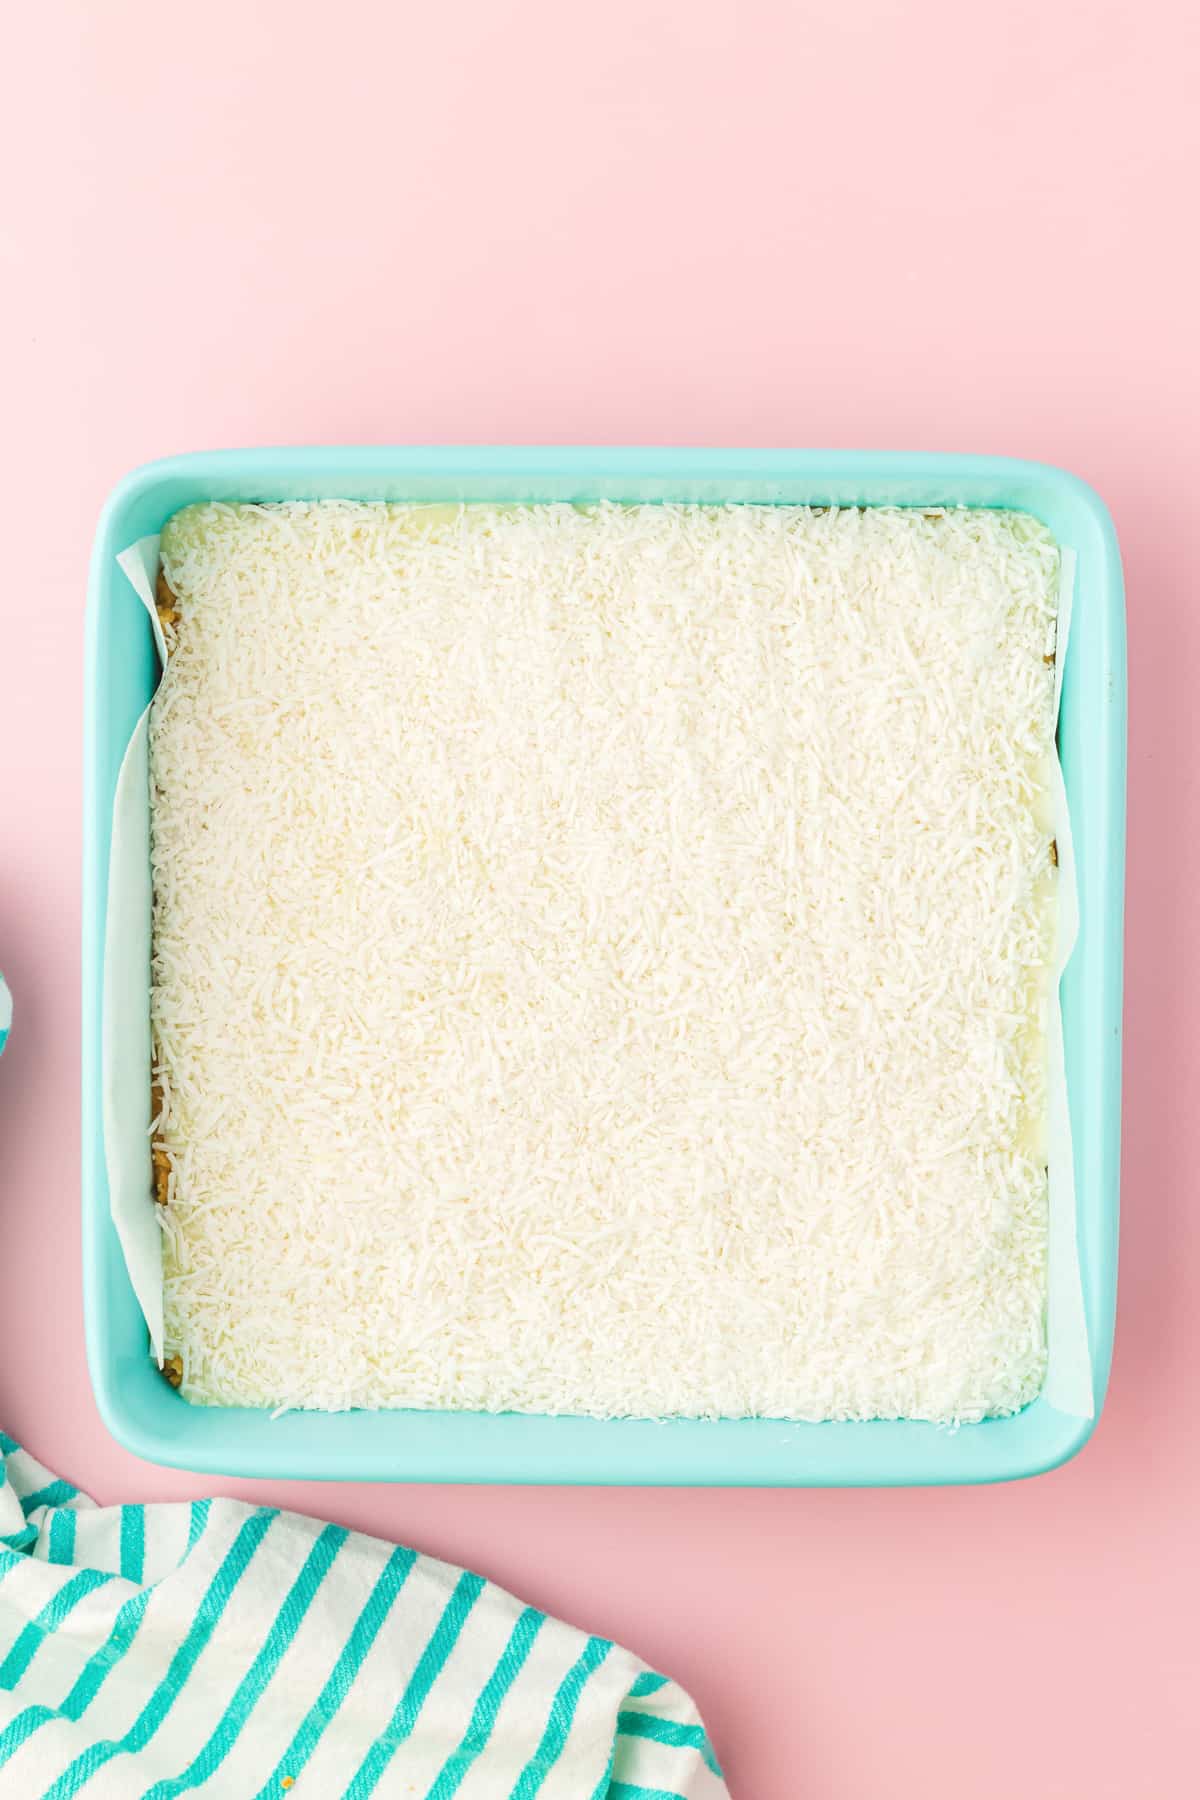 Shredded coconut in an even layer in square baking pan.